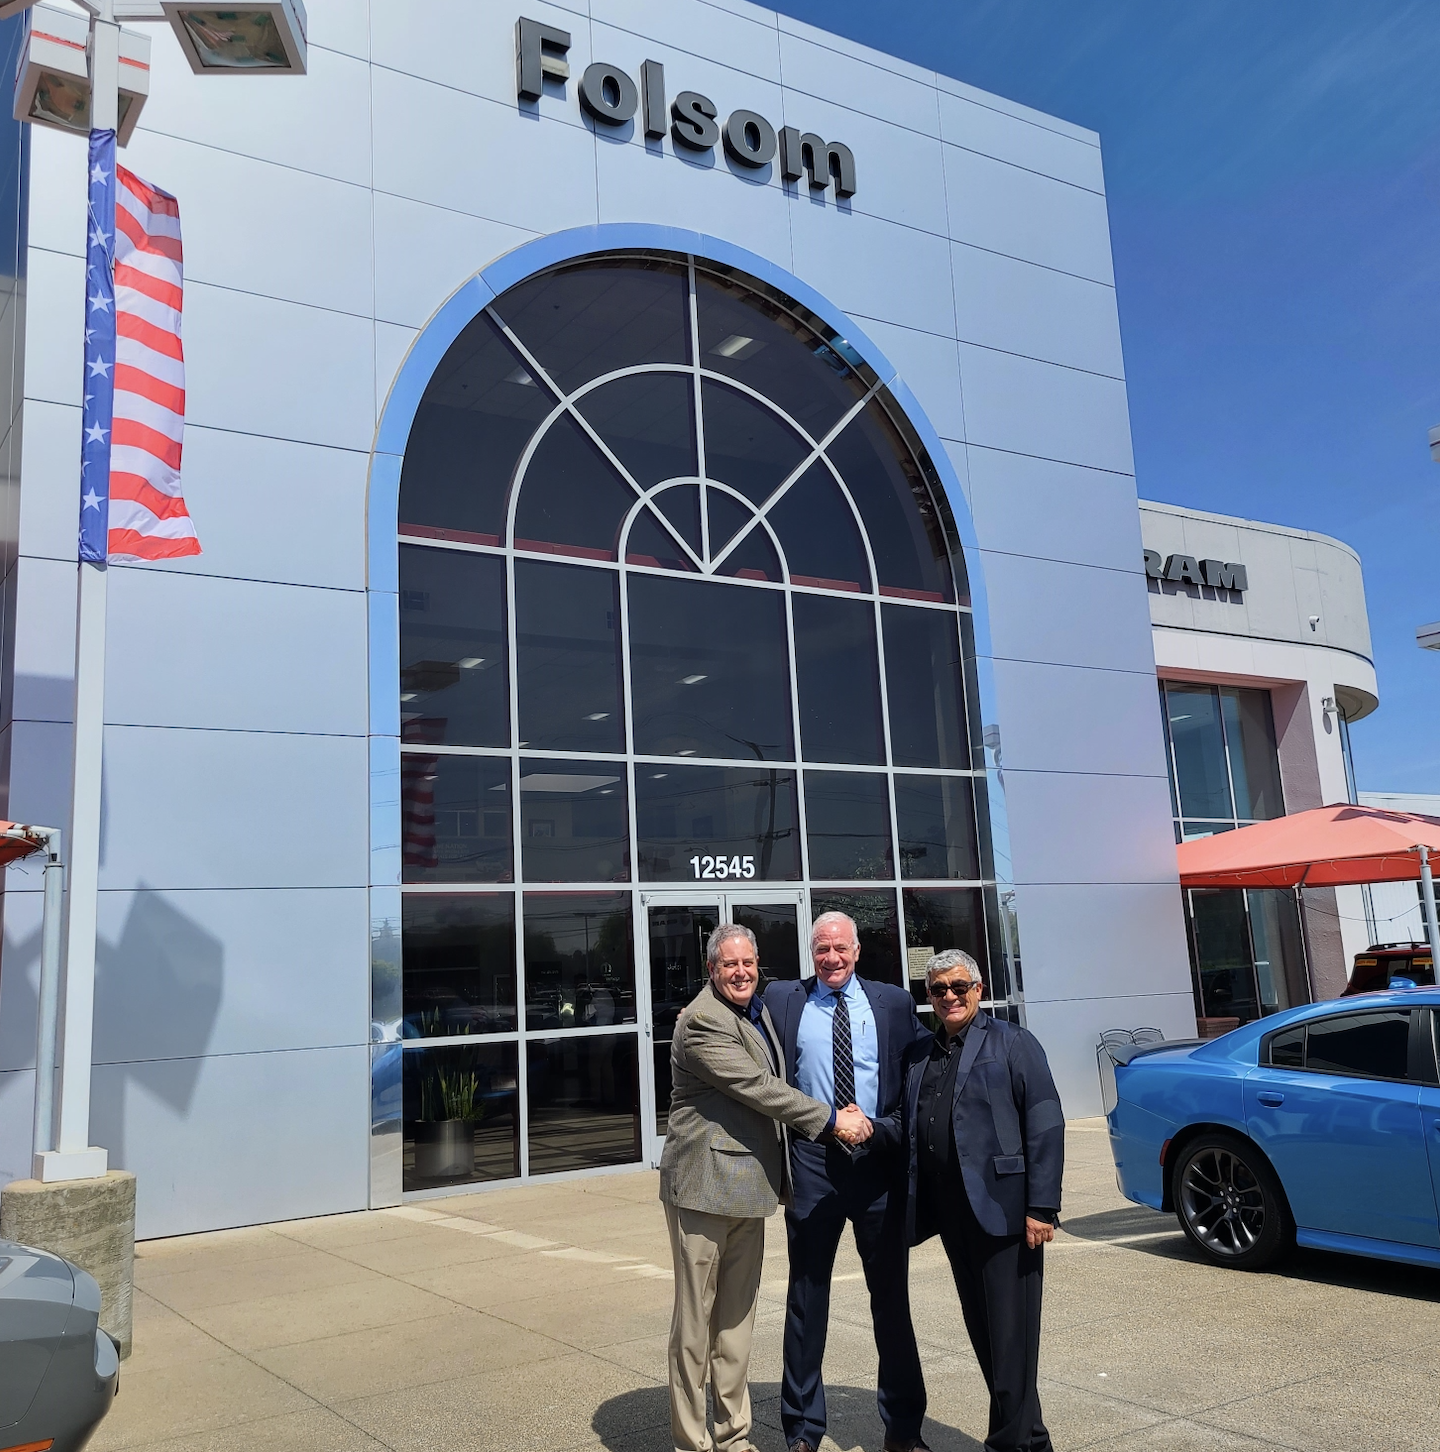 TIM LAMB GROUP BROKERS SALE OF FOLSOM LAKE CHRYSLER DODGE JEEP RAM DEALERSHIP IN FOLSOM, CALIFORNIA TO ORIGINAL OWNERS, FIFTH WAVE AUTOMOTIVE GROUP